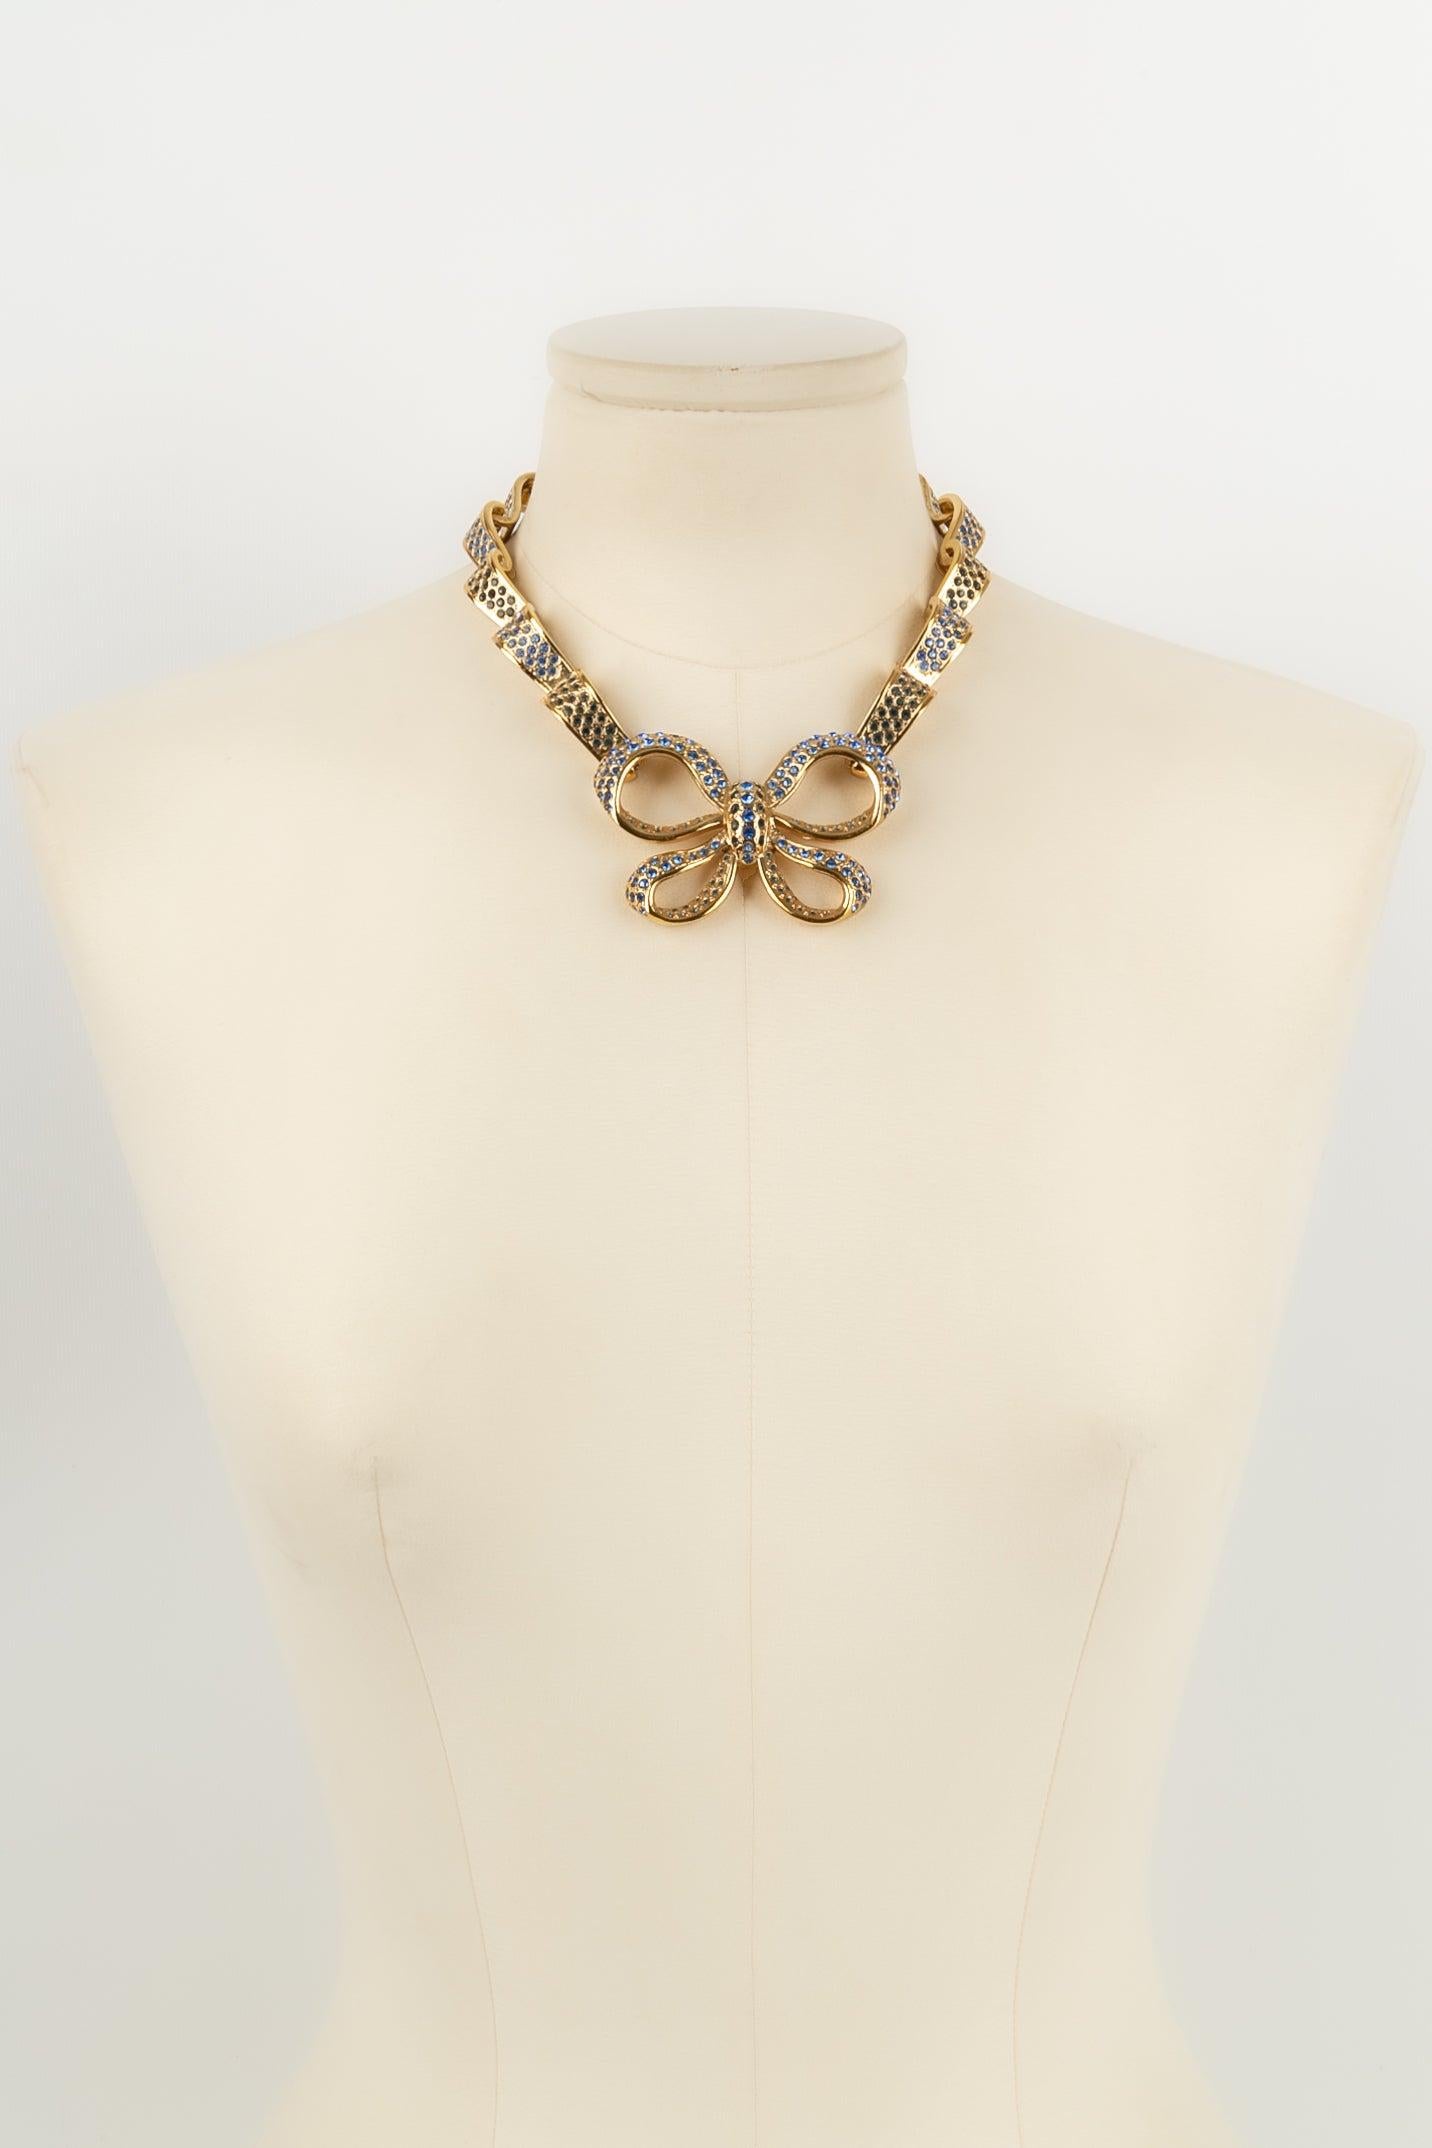 Yves Saint Laurent - (Made in France) Bow necklace in gold metal and blue strass.

Additional information: 
Dimensions: Length: 39 cm
Condition: Very good condition
Seller Ref number: BC10